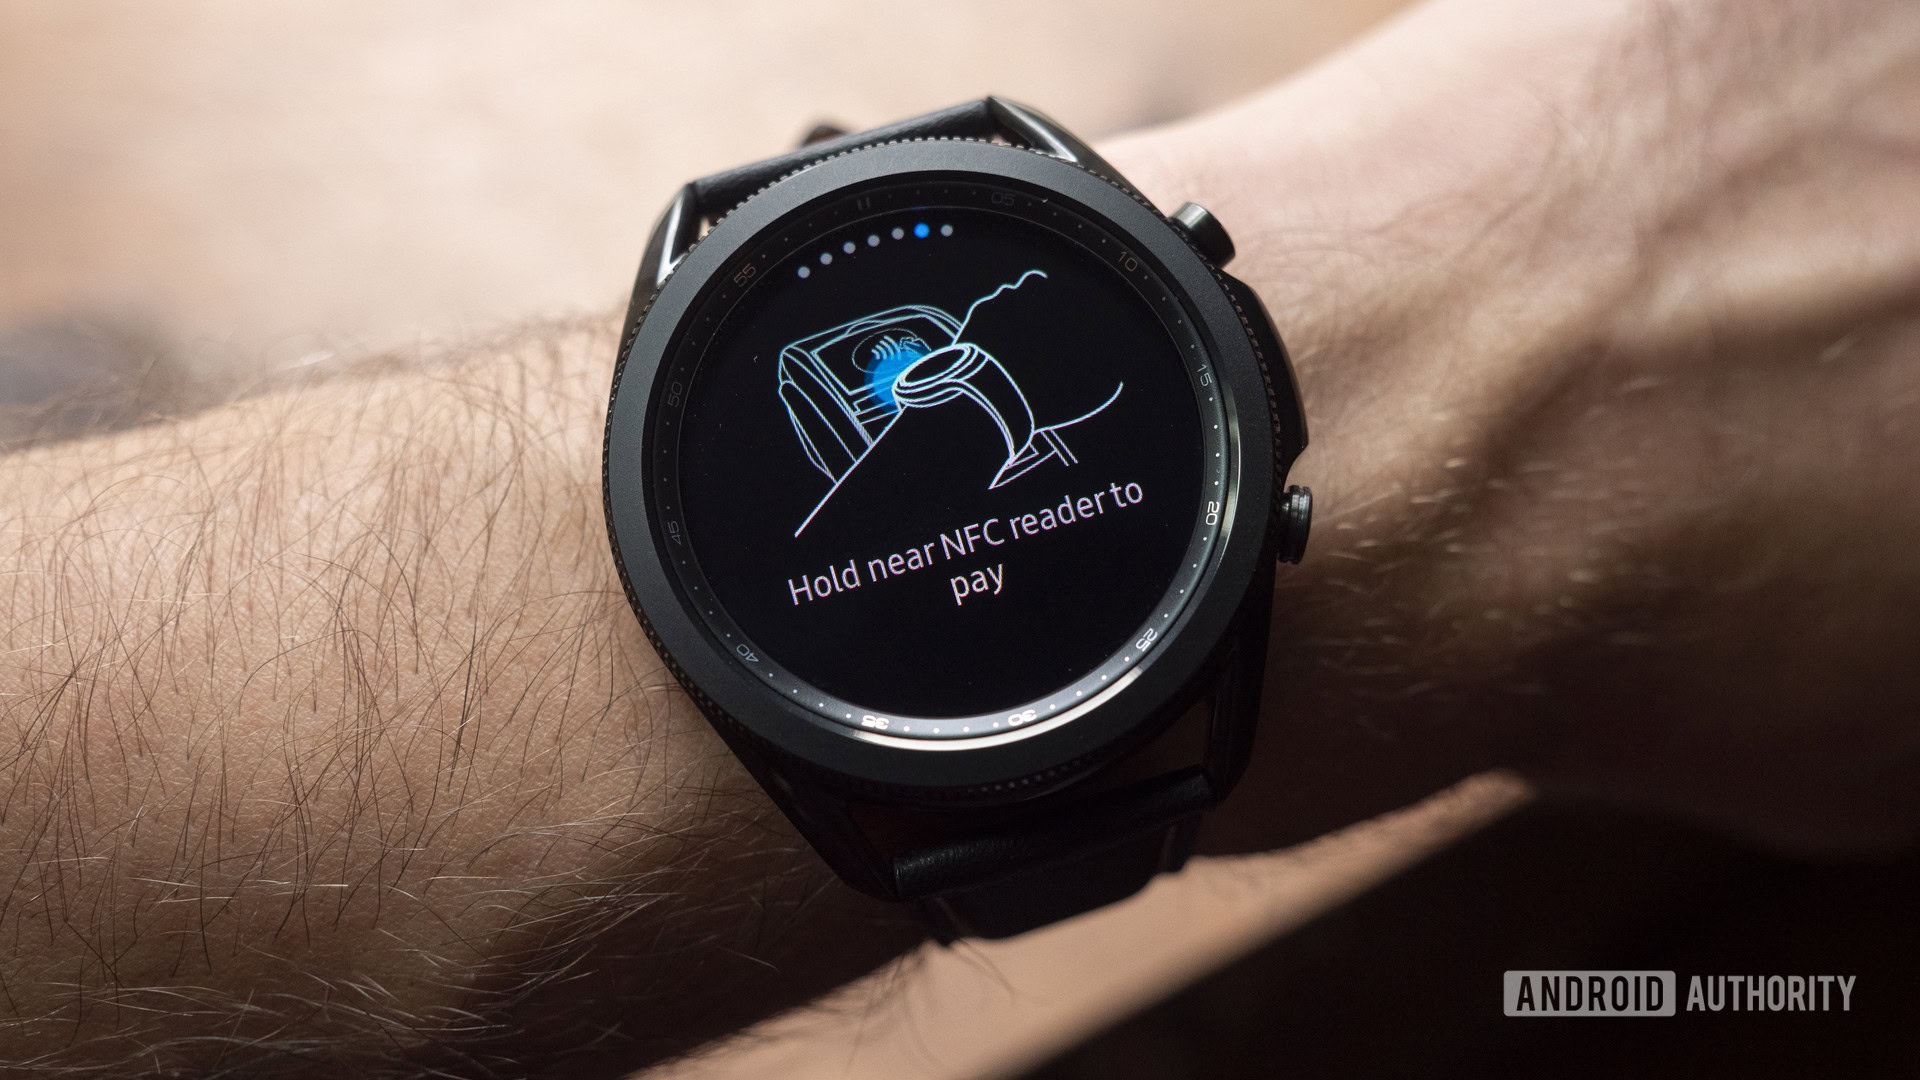 A Samsung Galaxy Watch 3 on a user's wrist displays the Samsung Pay screen.